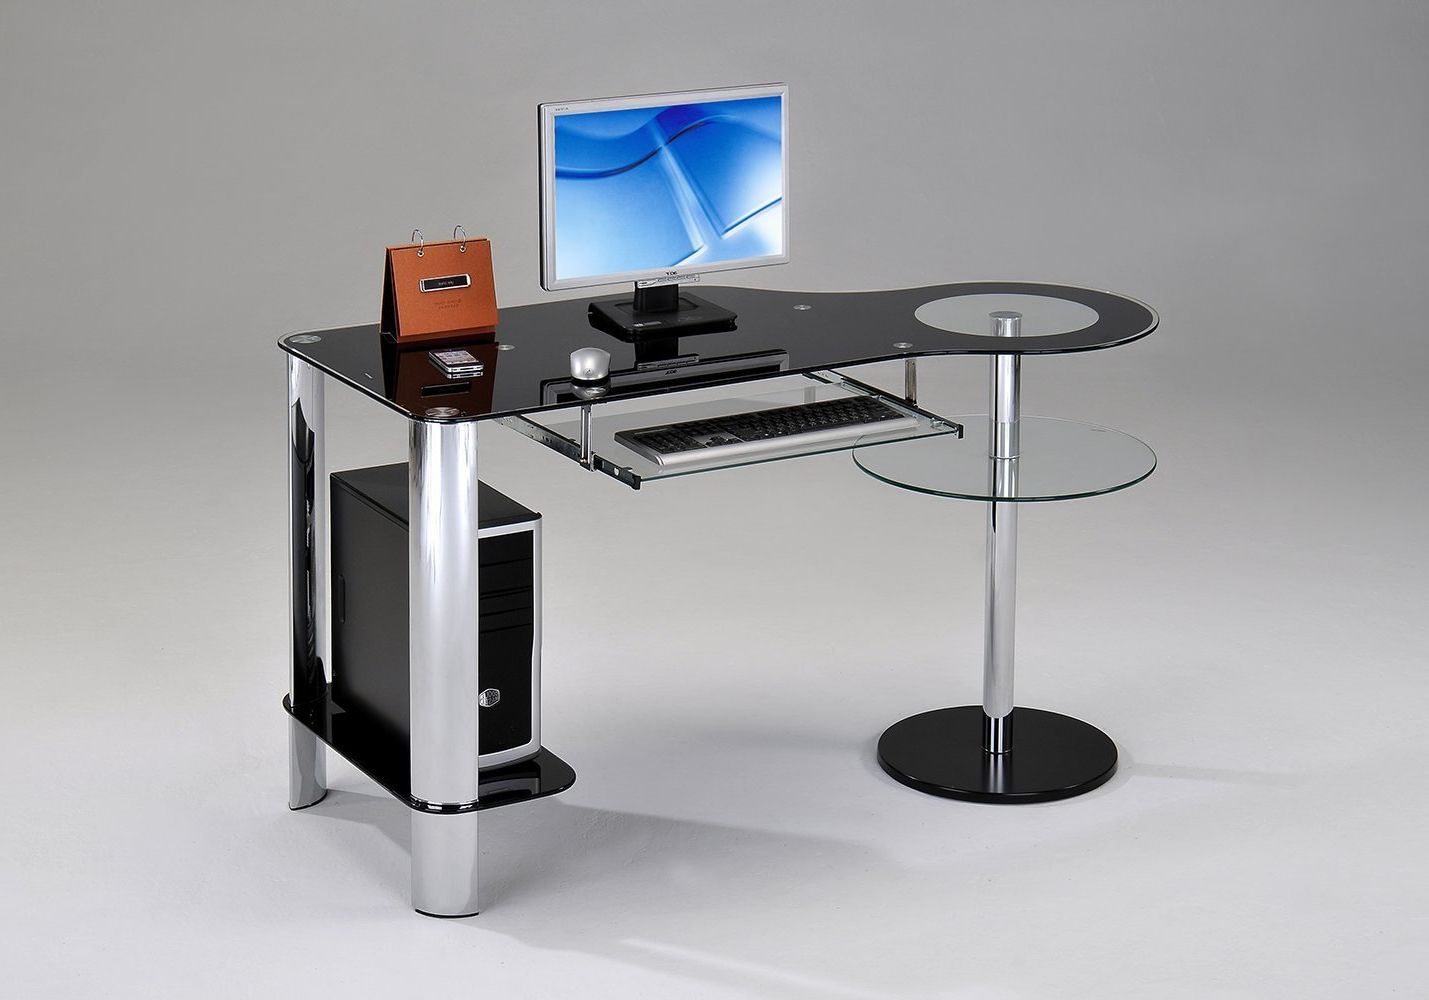 Most Recent Cheap Metal Computer Workstation, Find Metal Computer Workstation Deals For Glass White Wood And Black Metal Office Desks (View 14 of 15)